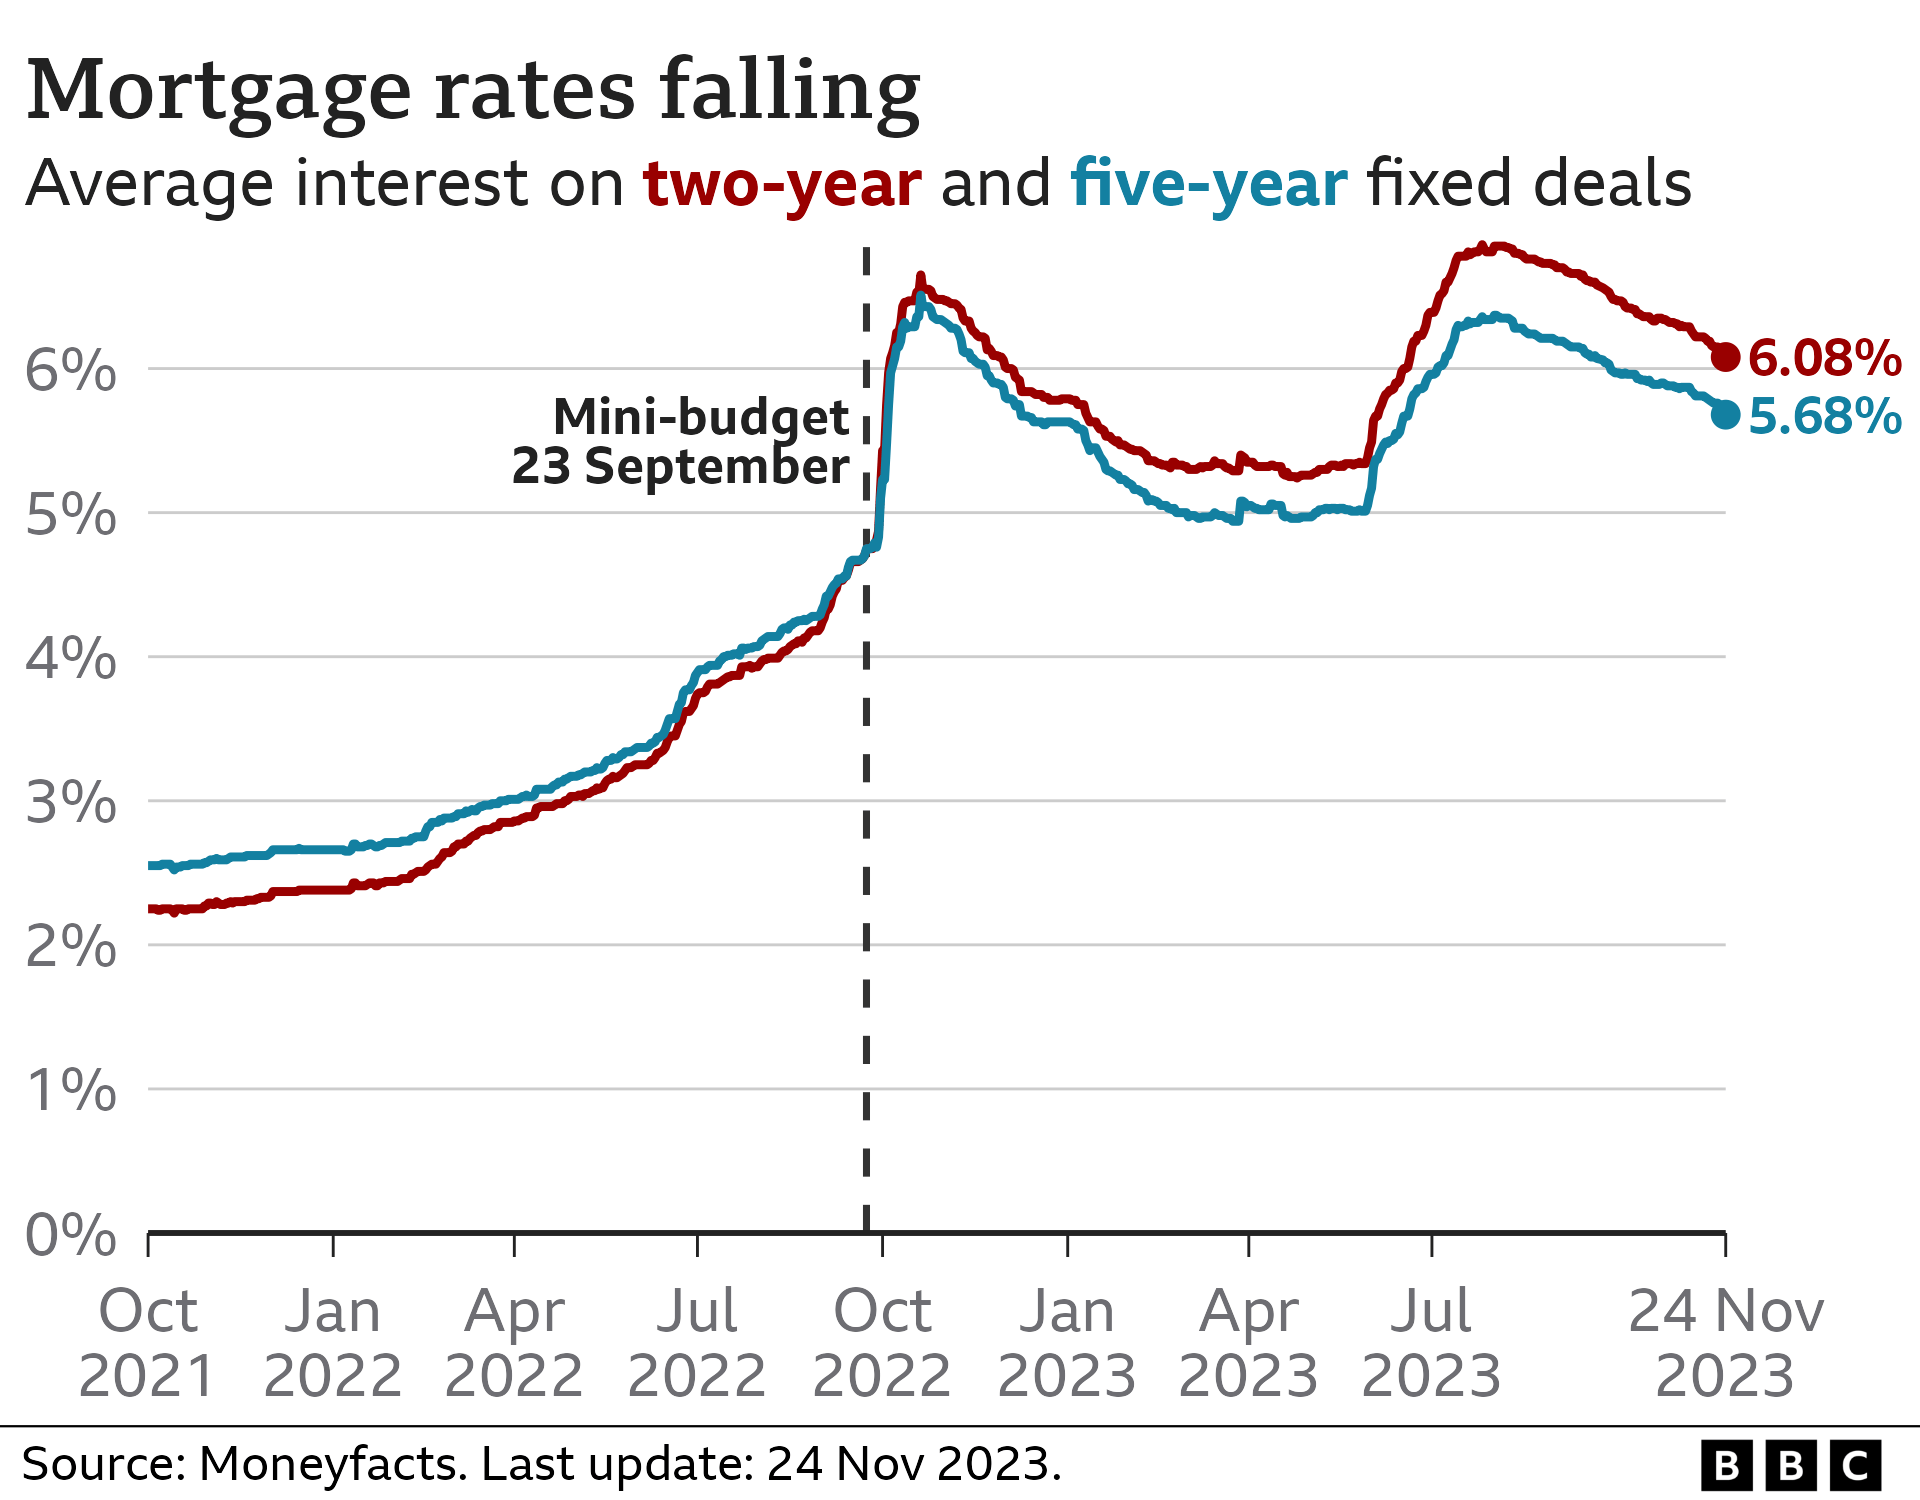 Line chart showing the average interest rate charged on two-year and five-year fixed deals. The two-year rate was 6.08% on 24 Nov 2023, and it peaked at 6.65% in October 2022. The five-year rate was 5.68%, and it peaked at 6.51%.